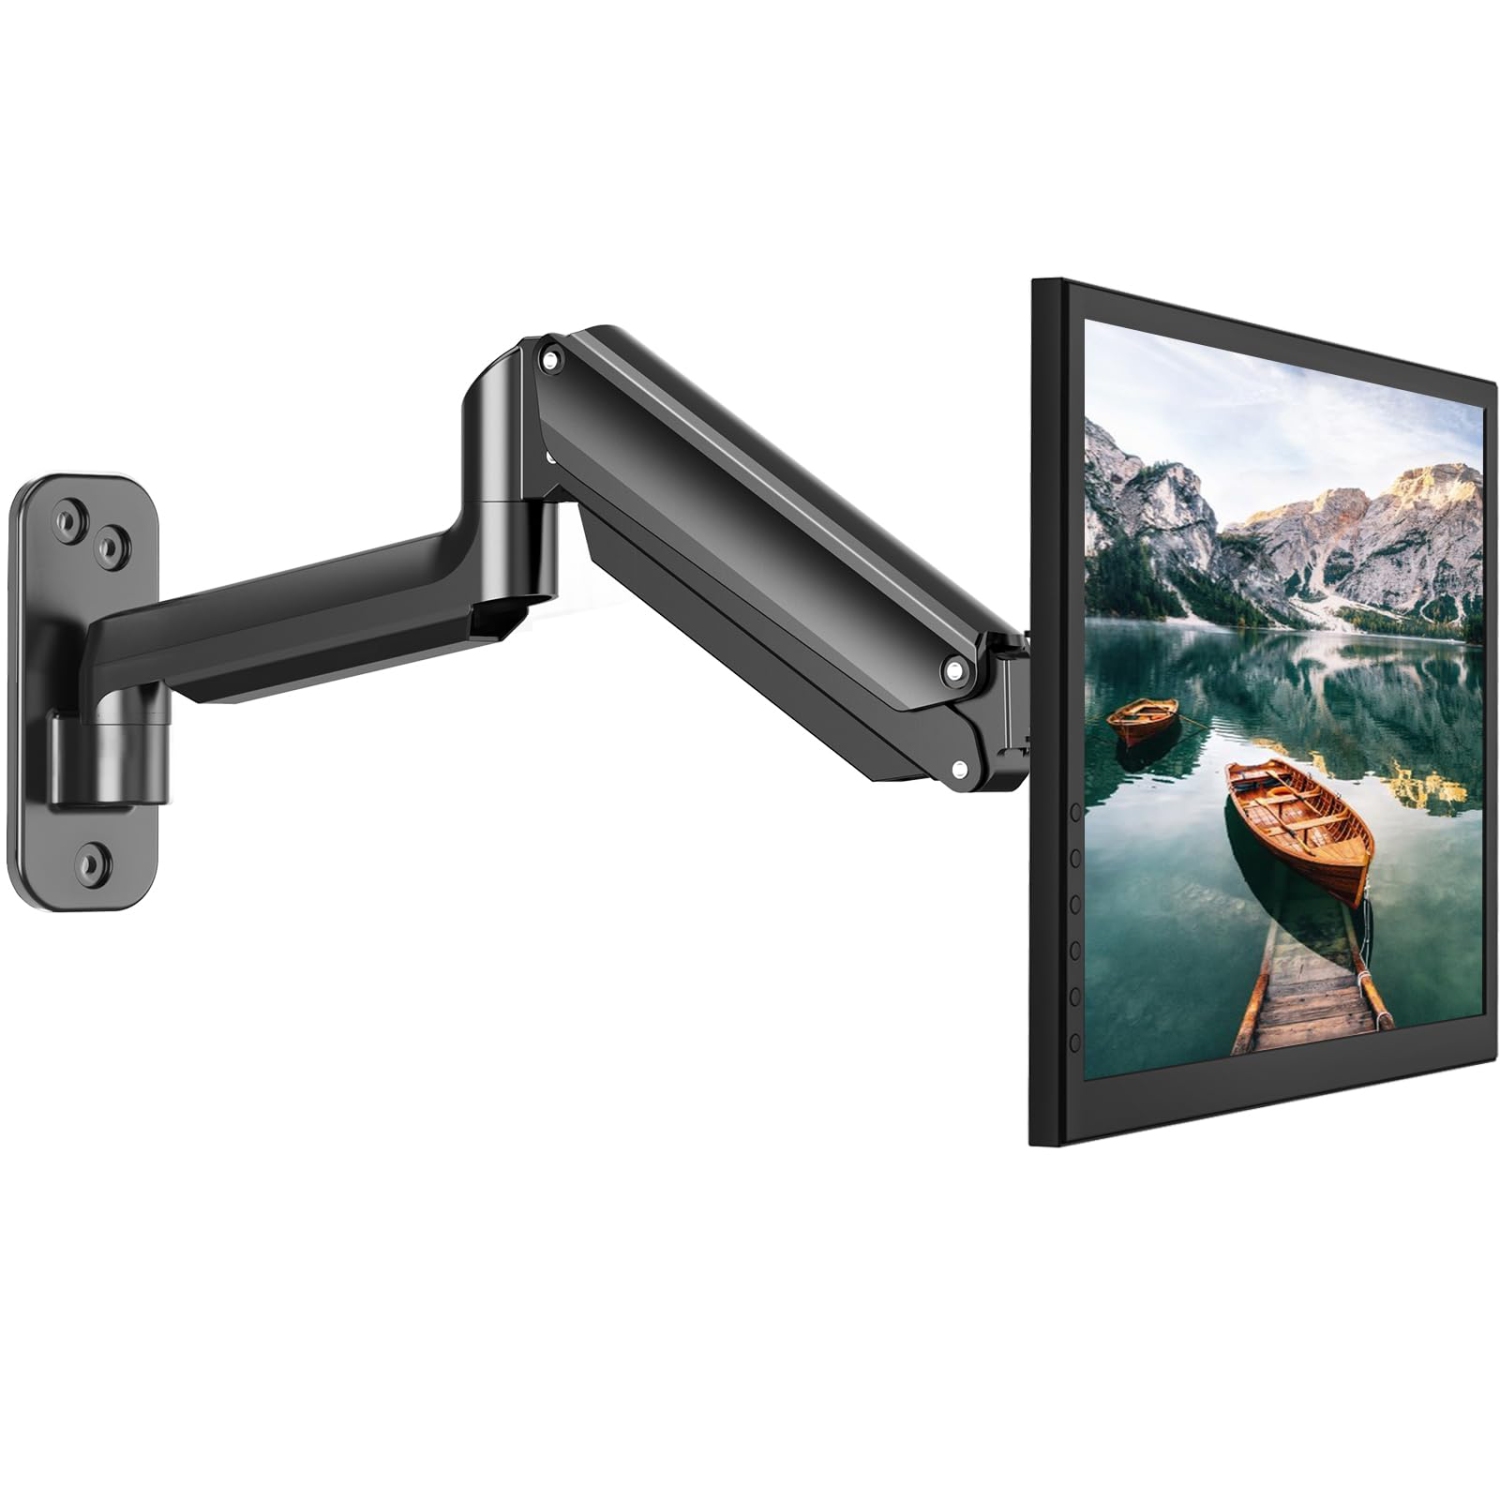 HUANUO Single Monitor Wall Mount for 13 to 32 Inch Computer Screen, Monitor Wall Mount Arm Holds up to 17.6lbs